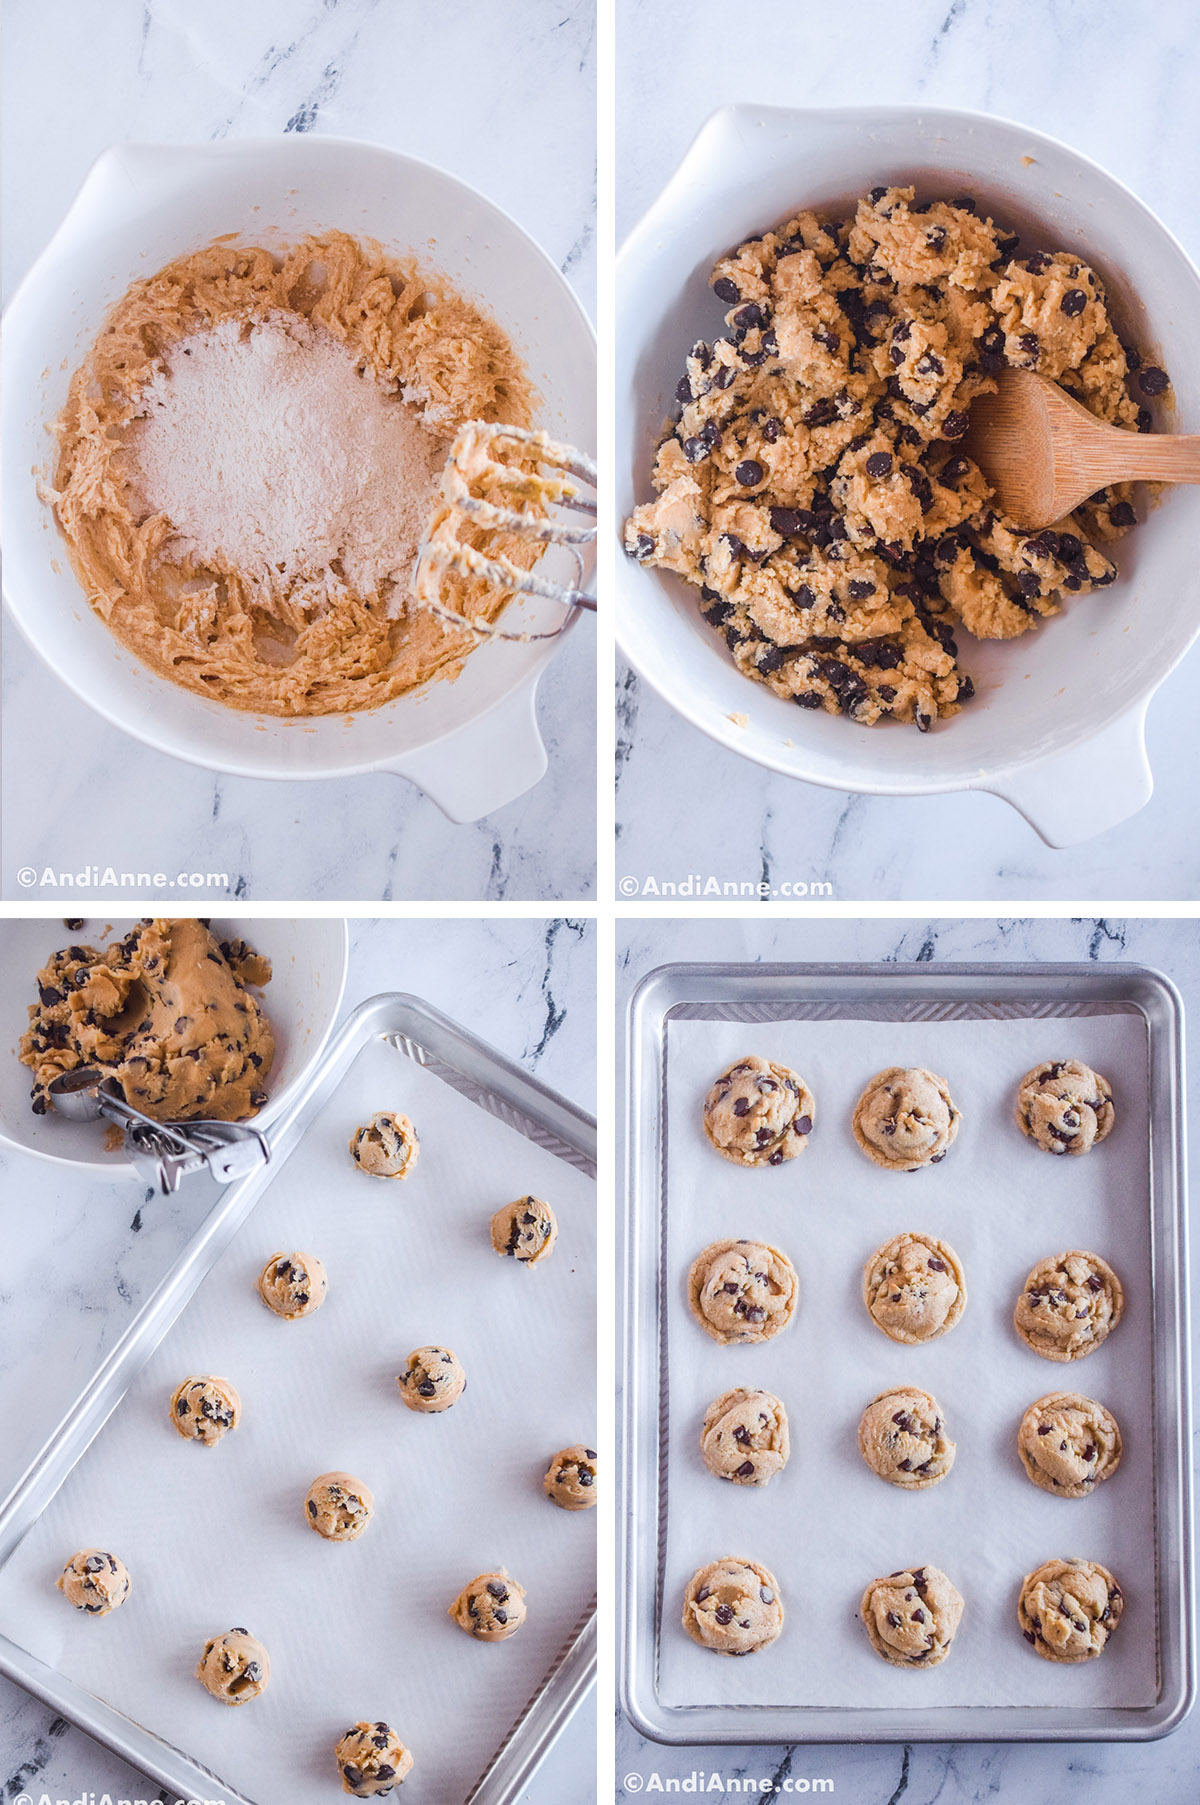 Four images showing steps to make the recipe. First is a white bowl with creamed butter and sugar and flour dumped on top. Second is cookie dough batter in bowl, third is raw cookies on baking sheet, fourth is baked cookies on baking sheet.